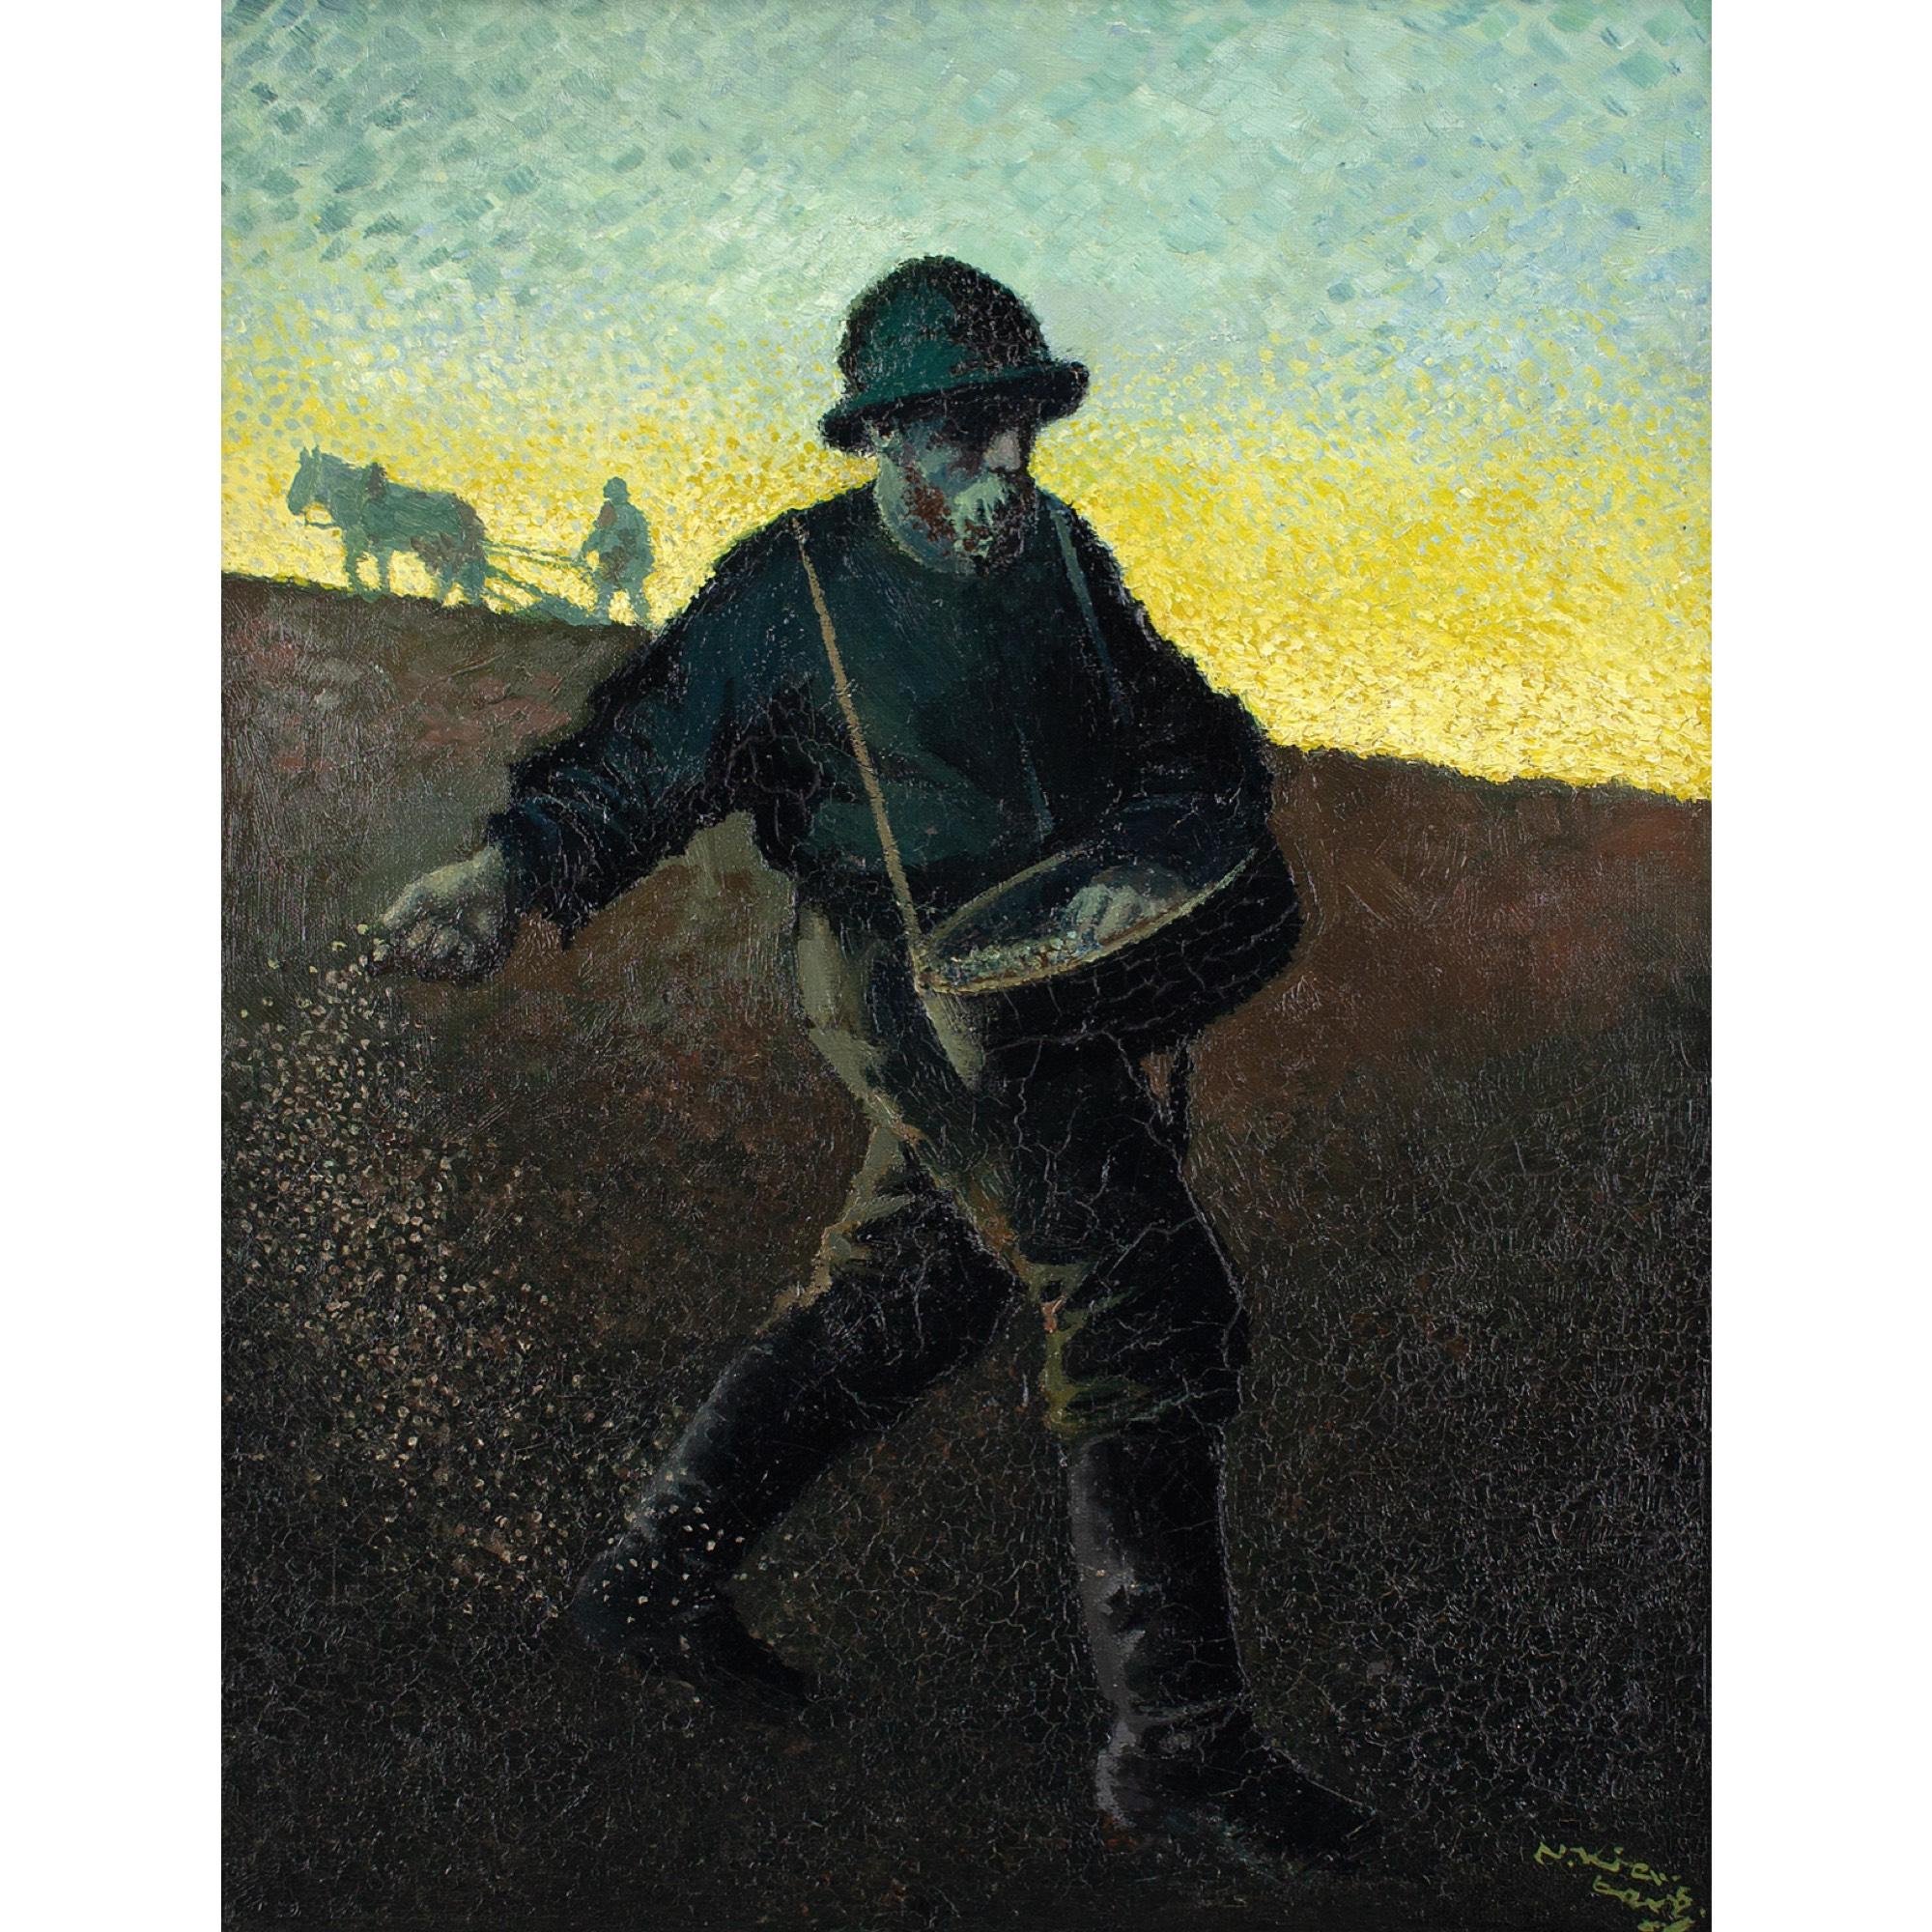 This early 20th-century post-impressionist oil painting by Swedish artist Nils Kjellberg (1871-1938) depicts a field worker sowing the land. It’s inspired by Jean-François Millet’s work of the same name.

Clutching handfuls of seeds he marches